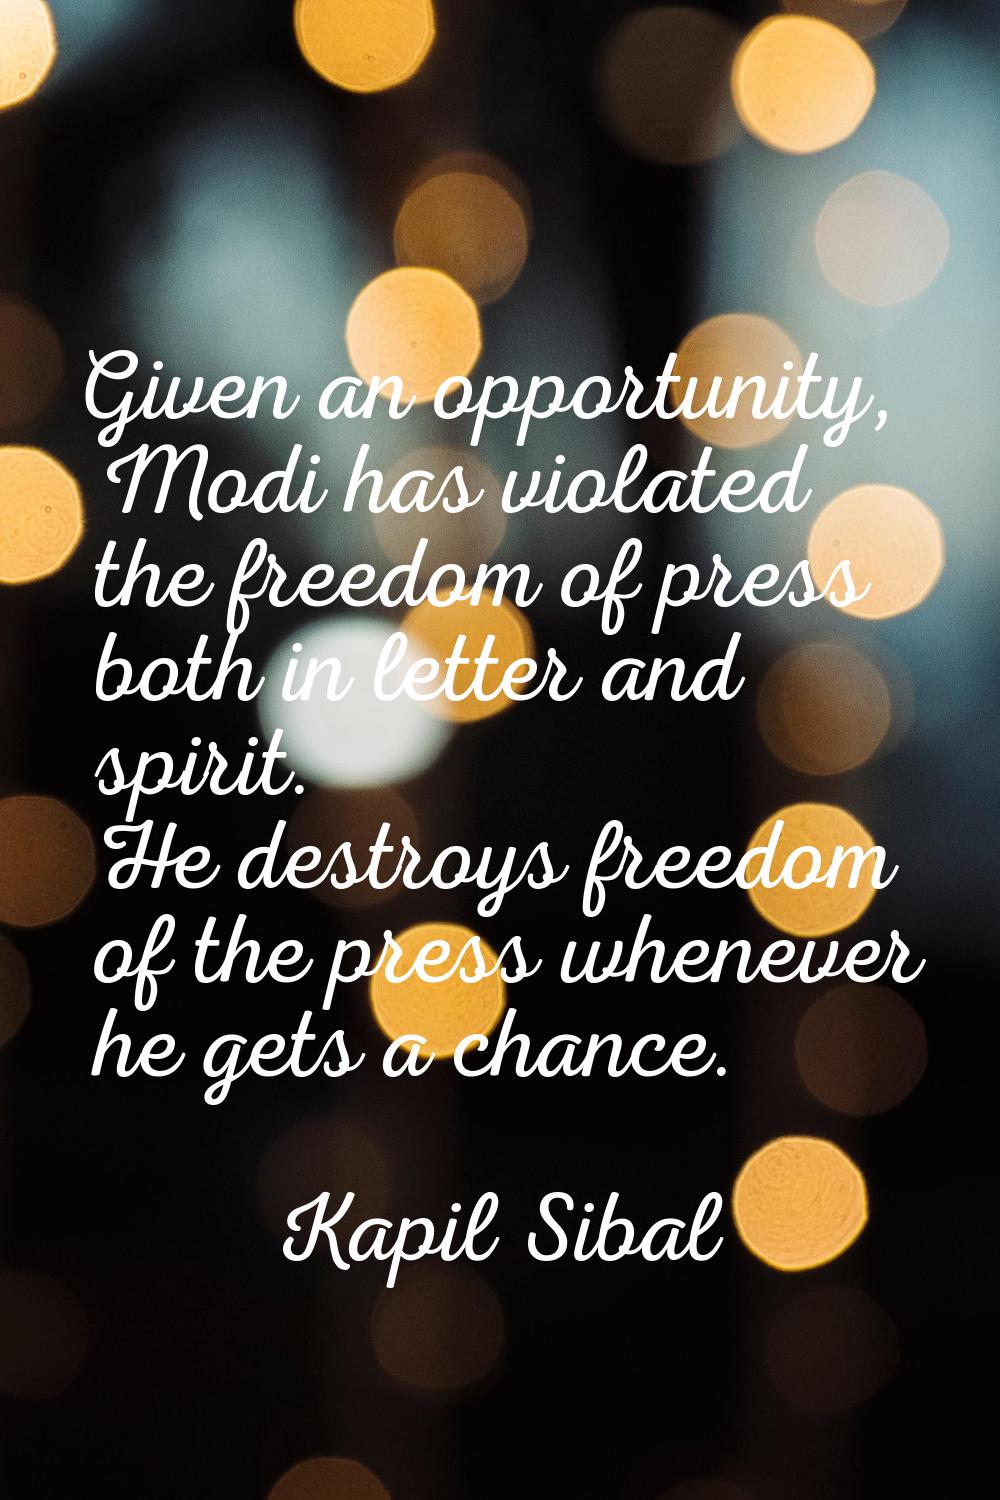 Given an opportunity, Modi has violated the freedom of press both in letter and spirit. He destroys